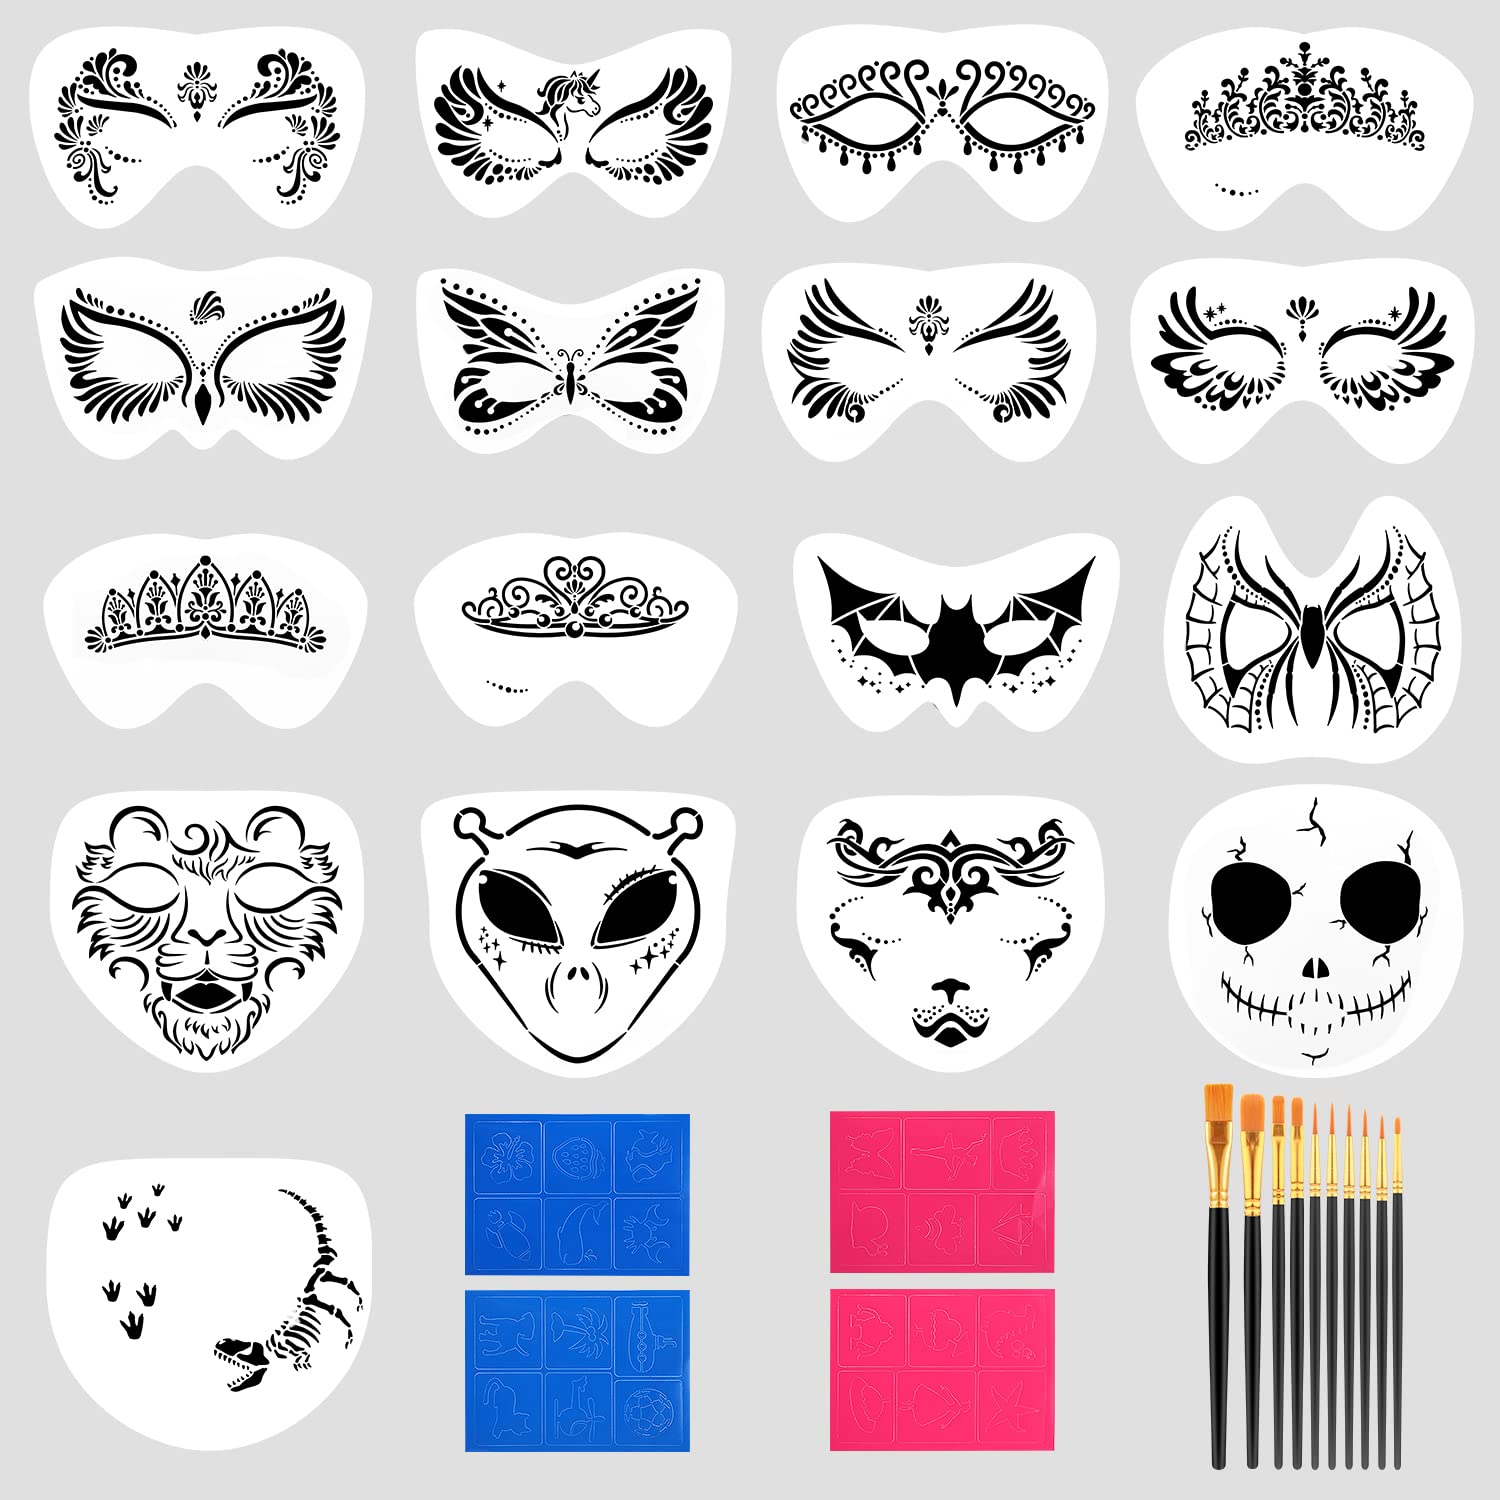 Kinbom pcs face paint stencils kit includes reusable large face painting stencil small stick paint templates and brushes for kids party makeup body art painting chrismas